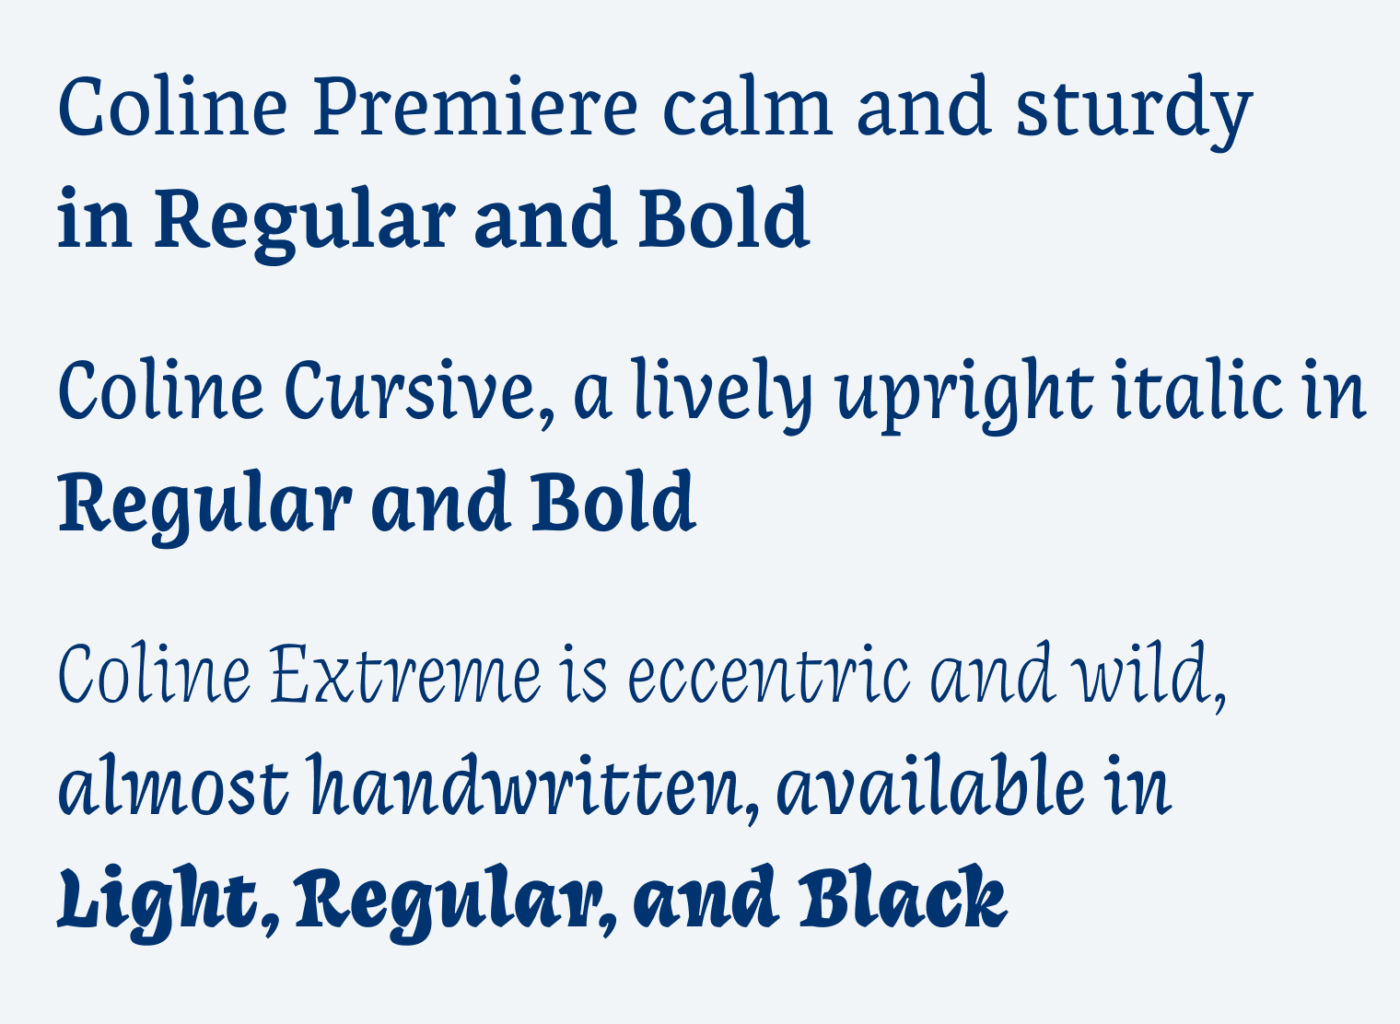 Coline Premiere calm and sturdy in Regular and Bold, Coline Cursive, a lively upright italic in Regular and Bold, Coline Extreme is eccentric and wild, almost handwritten, available in, Light, Regular, and Black